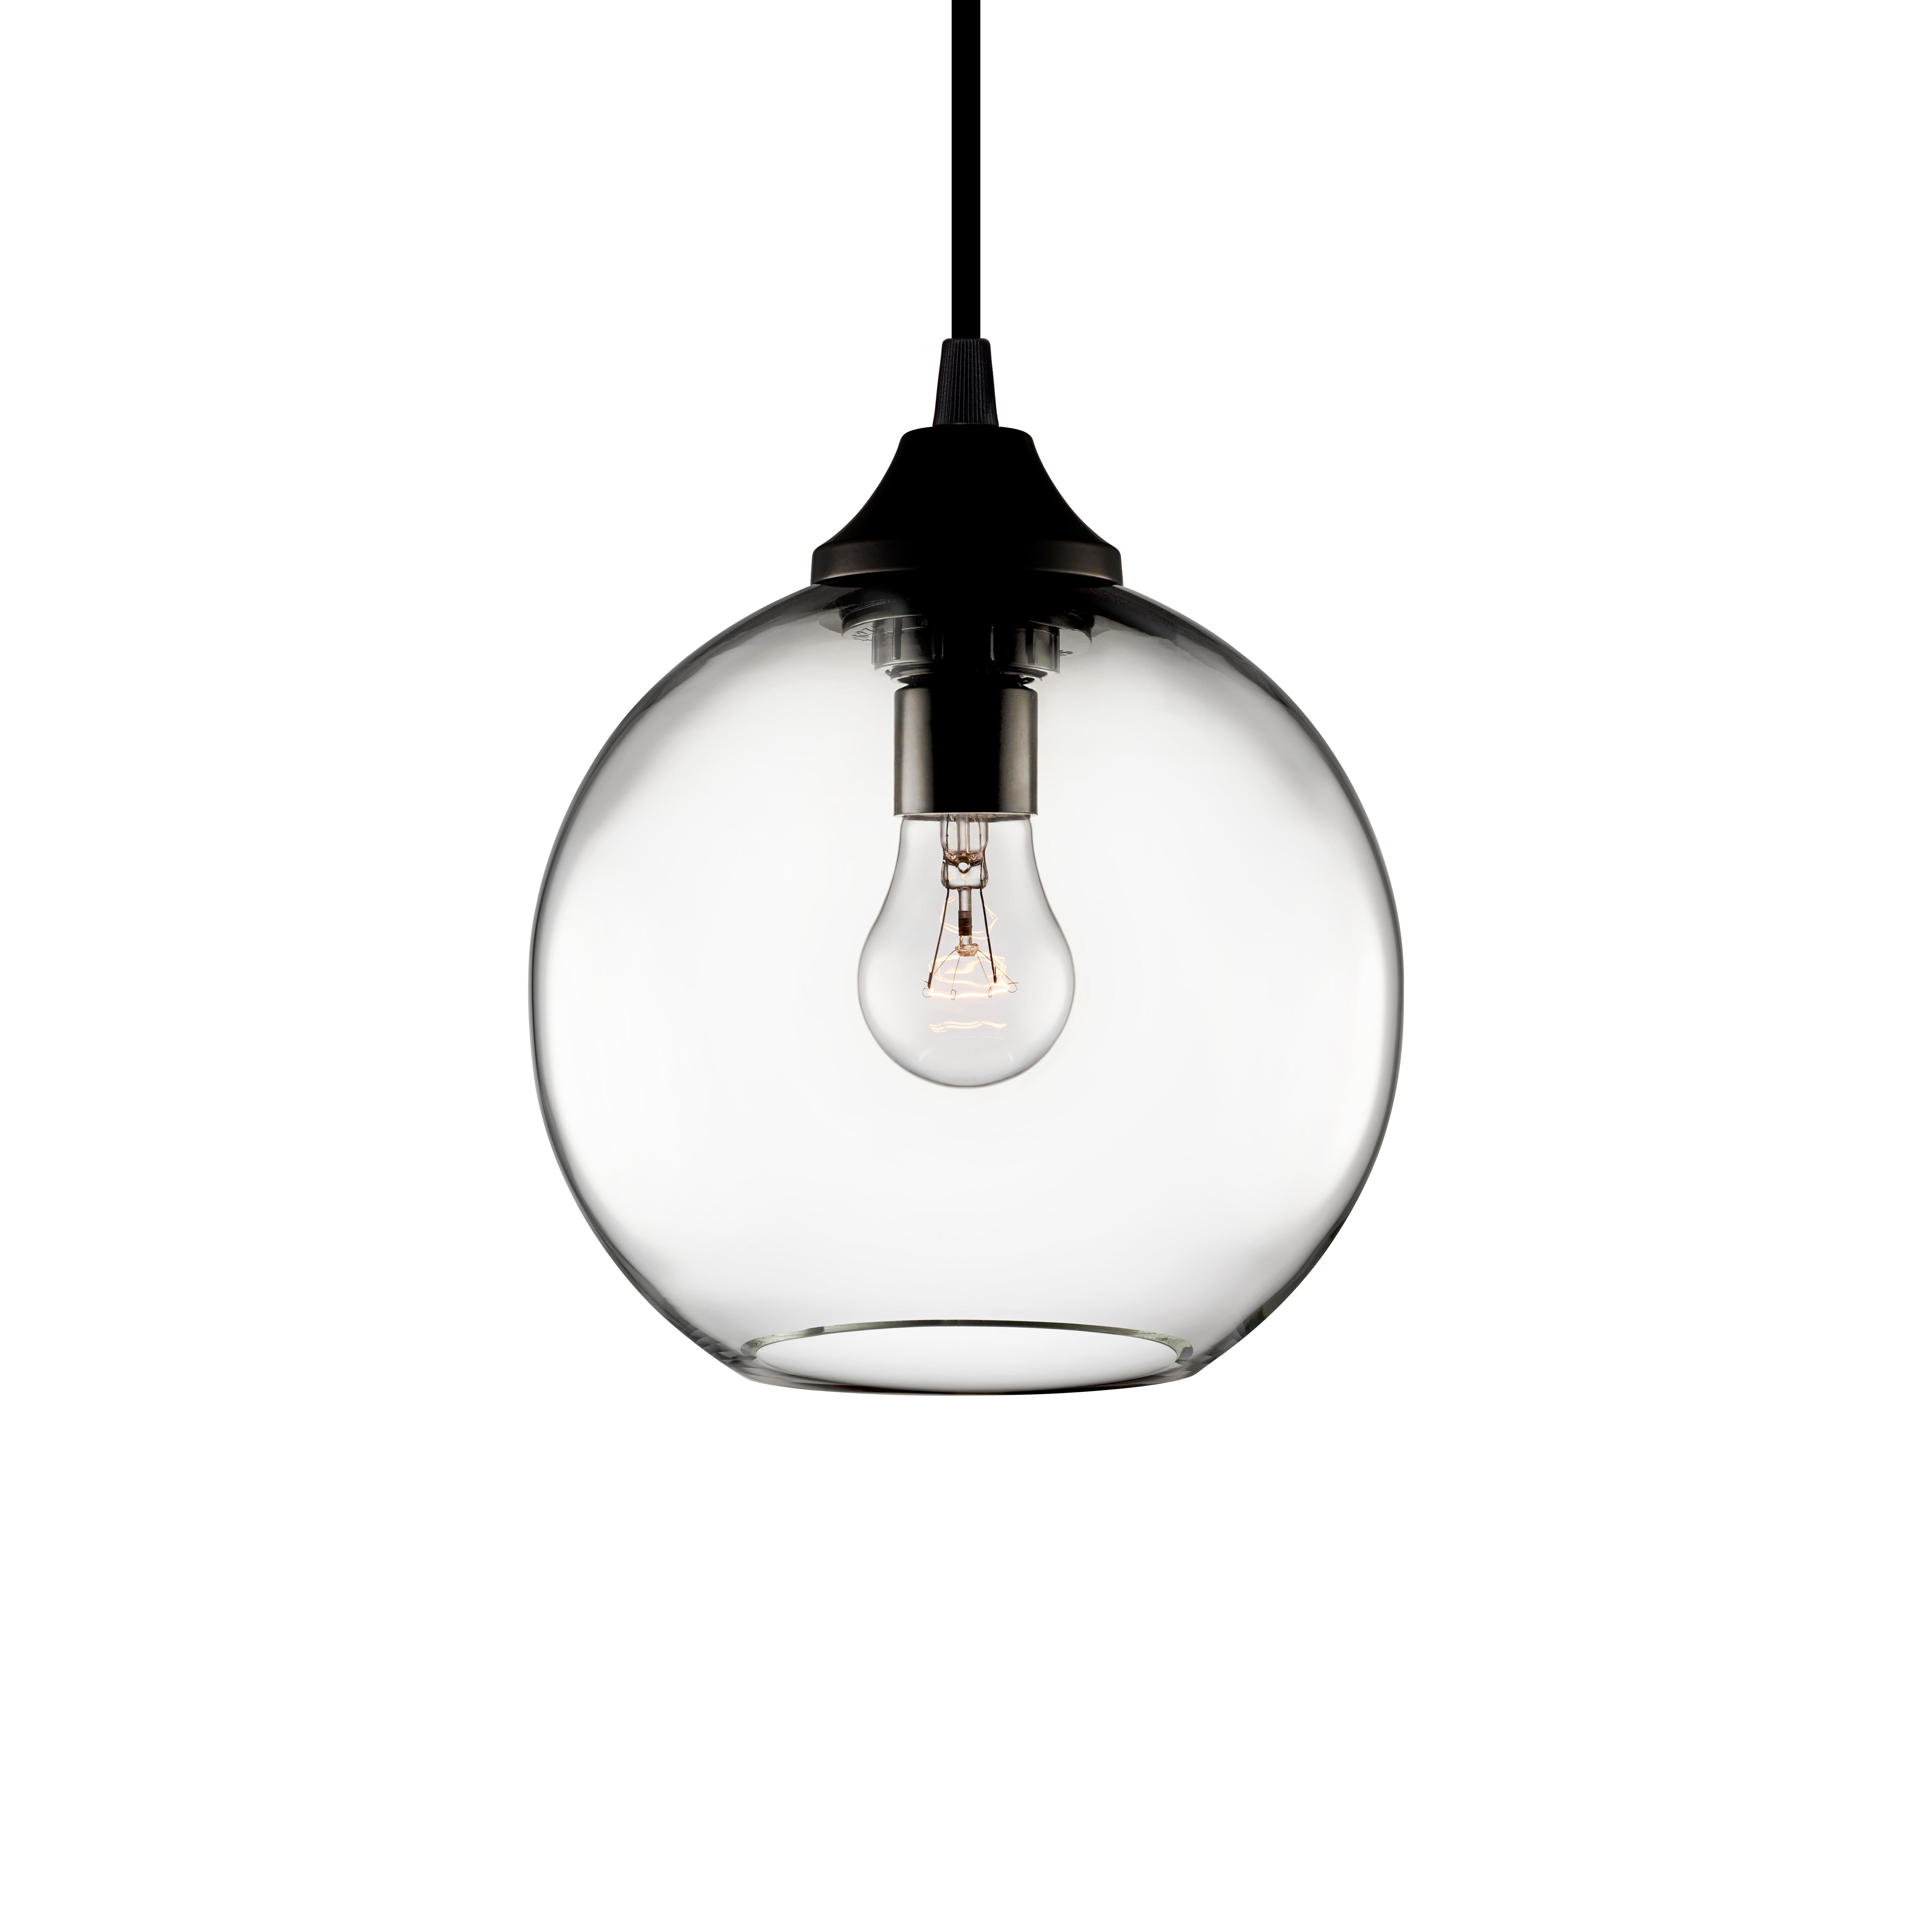 Brought to our line by popular demand, the Solitaire Petite pendant is the smaller version of Niche's Classic spherical Silhouette. When coupled together, the bulb at the center of this pendant accentuates enduring quality and beauty. Every single